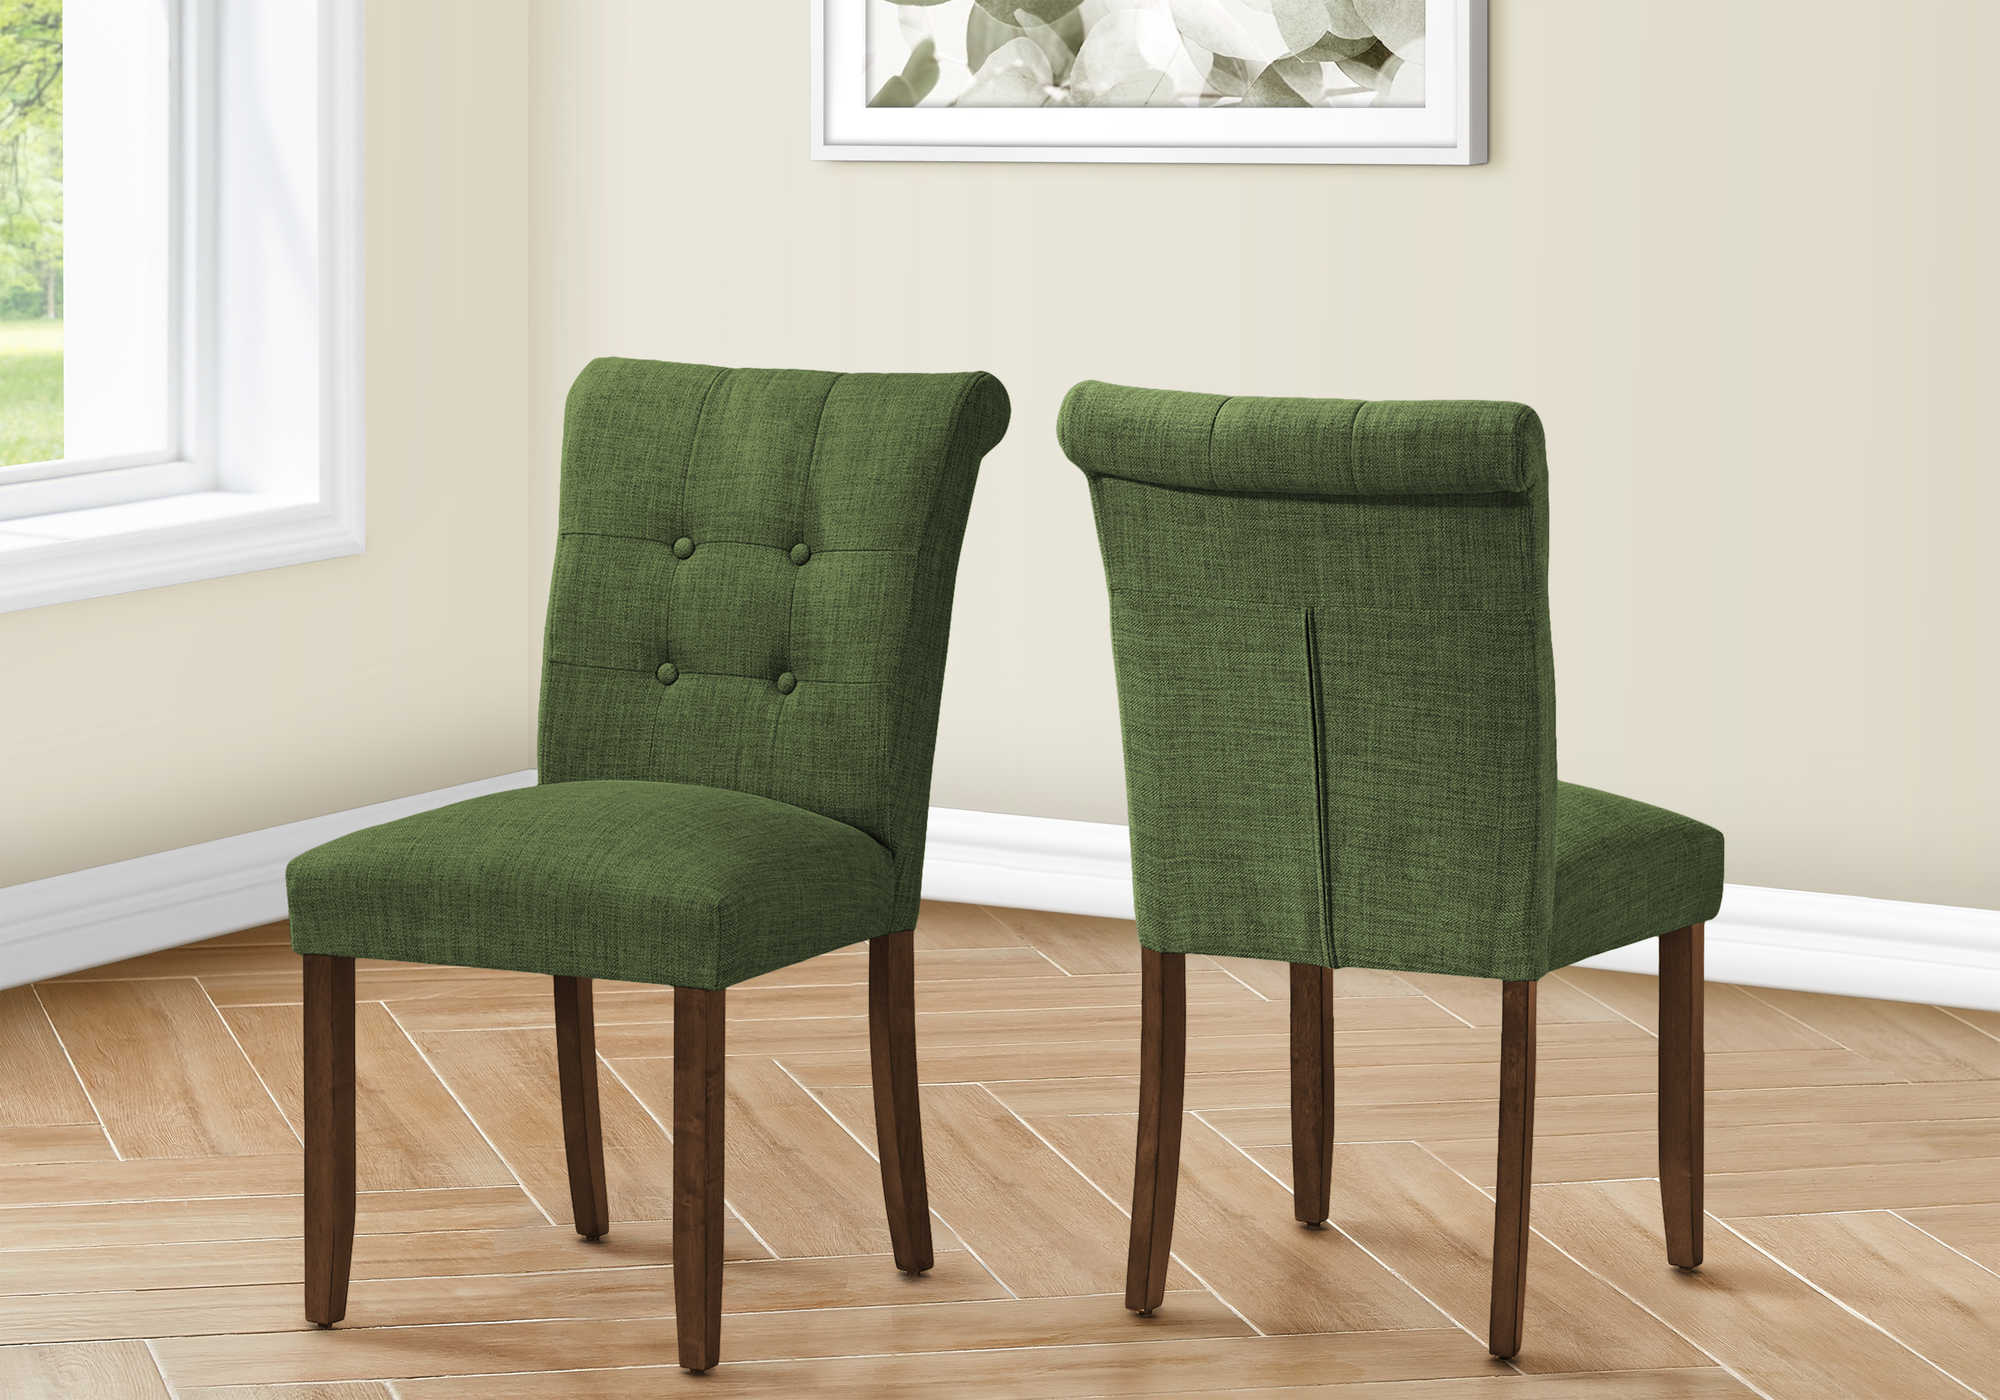 DINING CHAIR - 2PCS / 38"H UPHOLSTERED GREEN FABRIC